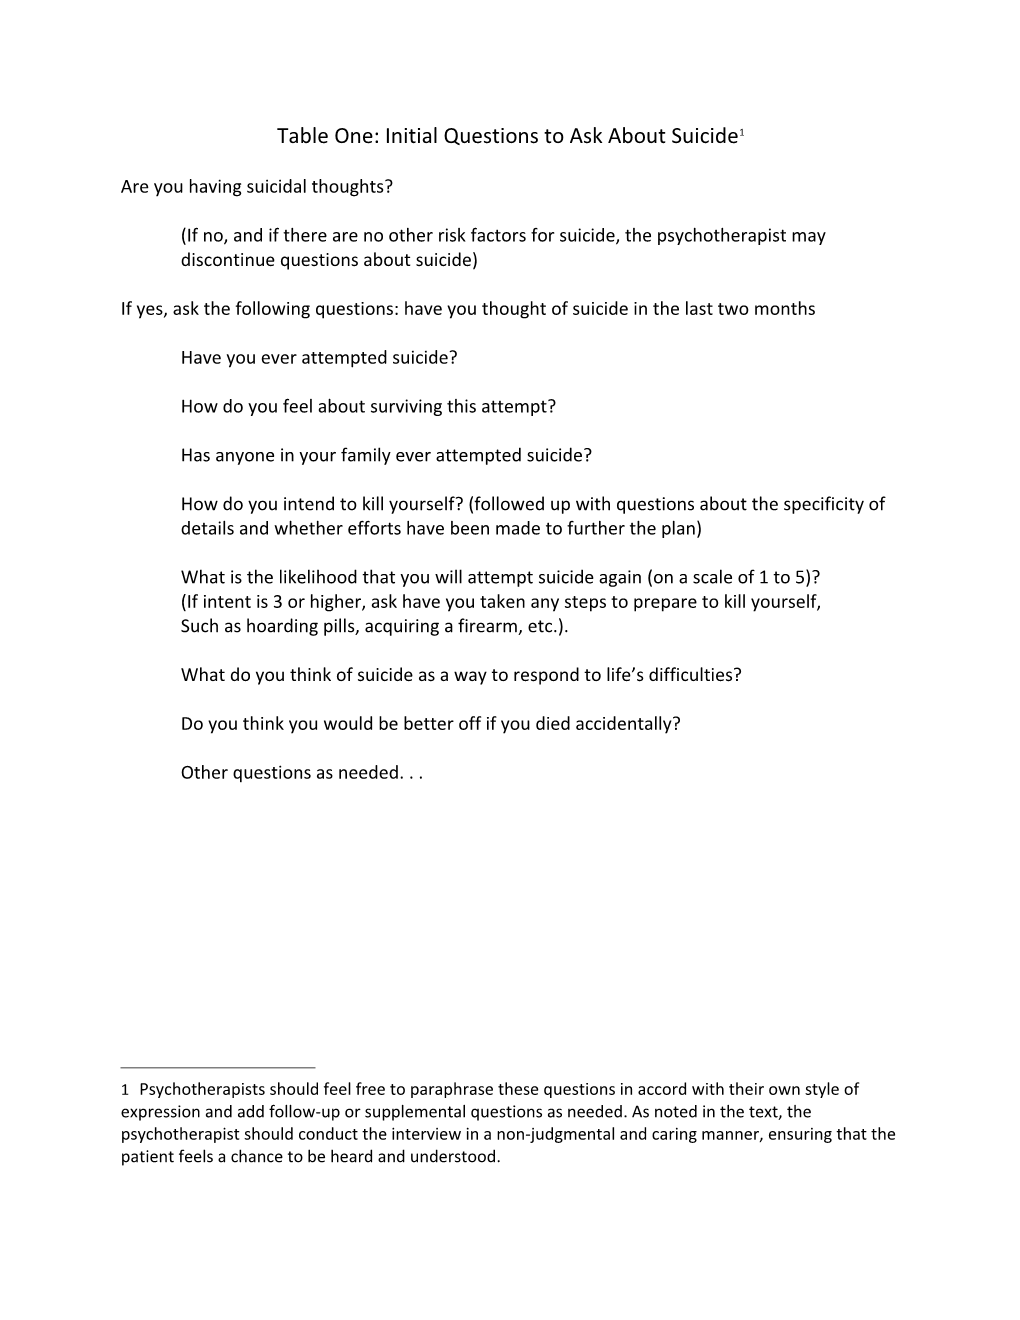 Table One: Initial Questions to Ask About Suicide 1